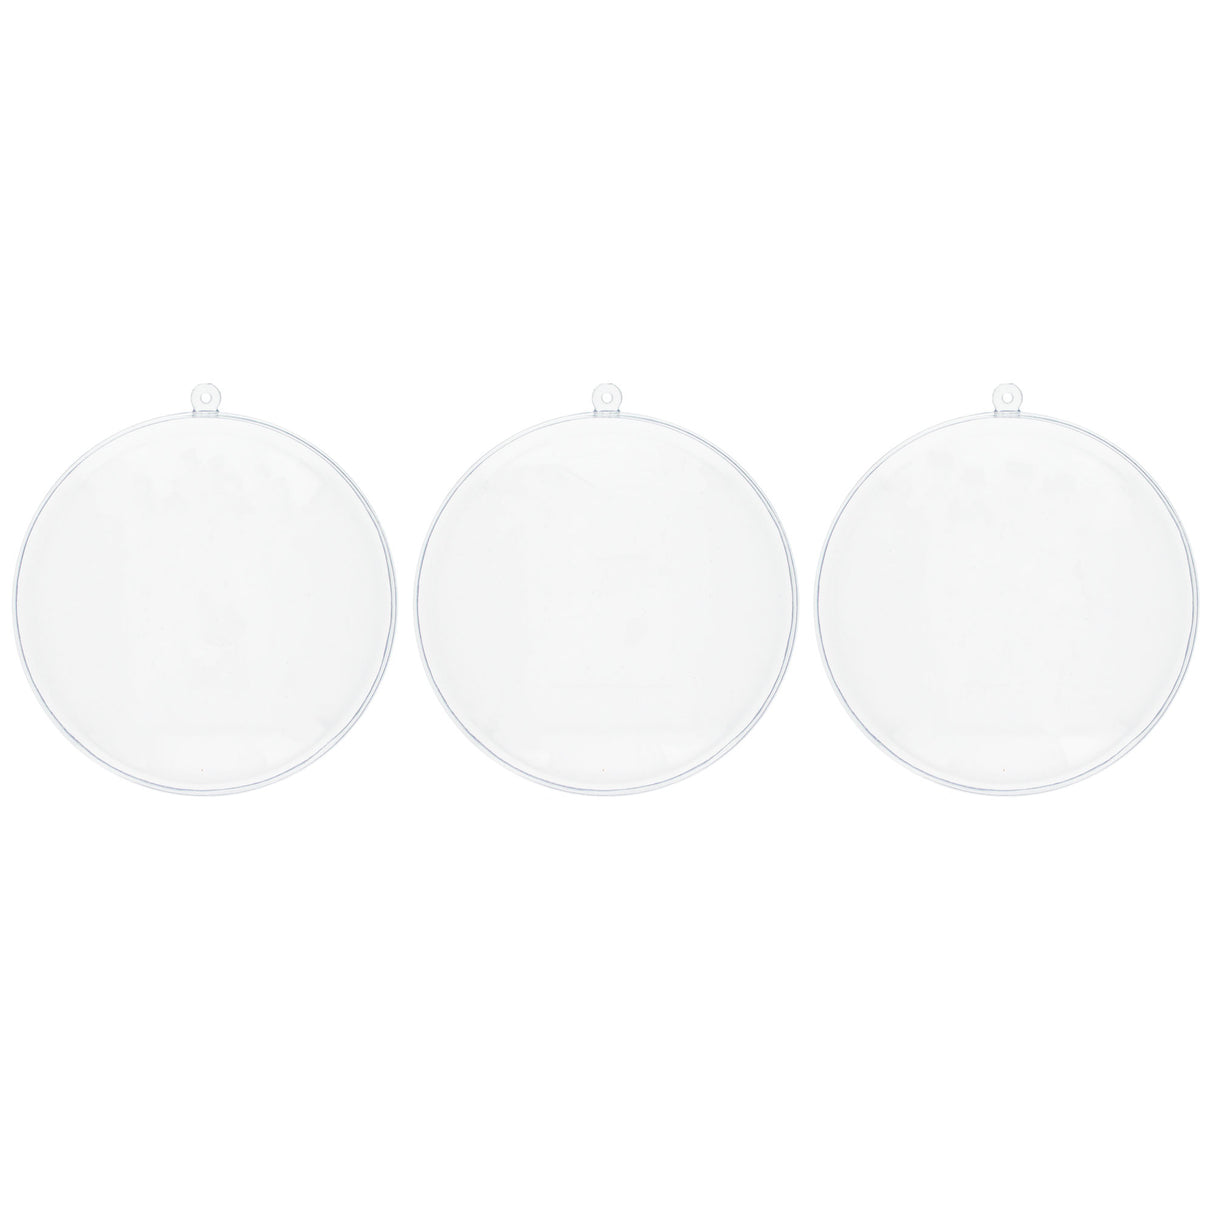 Plastic Set of 3 Clear Plastic Disc Ornaments 4.5 Inches (110 mm) in Clear color Disc